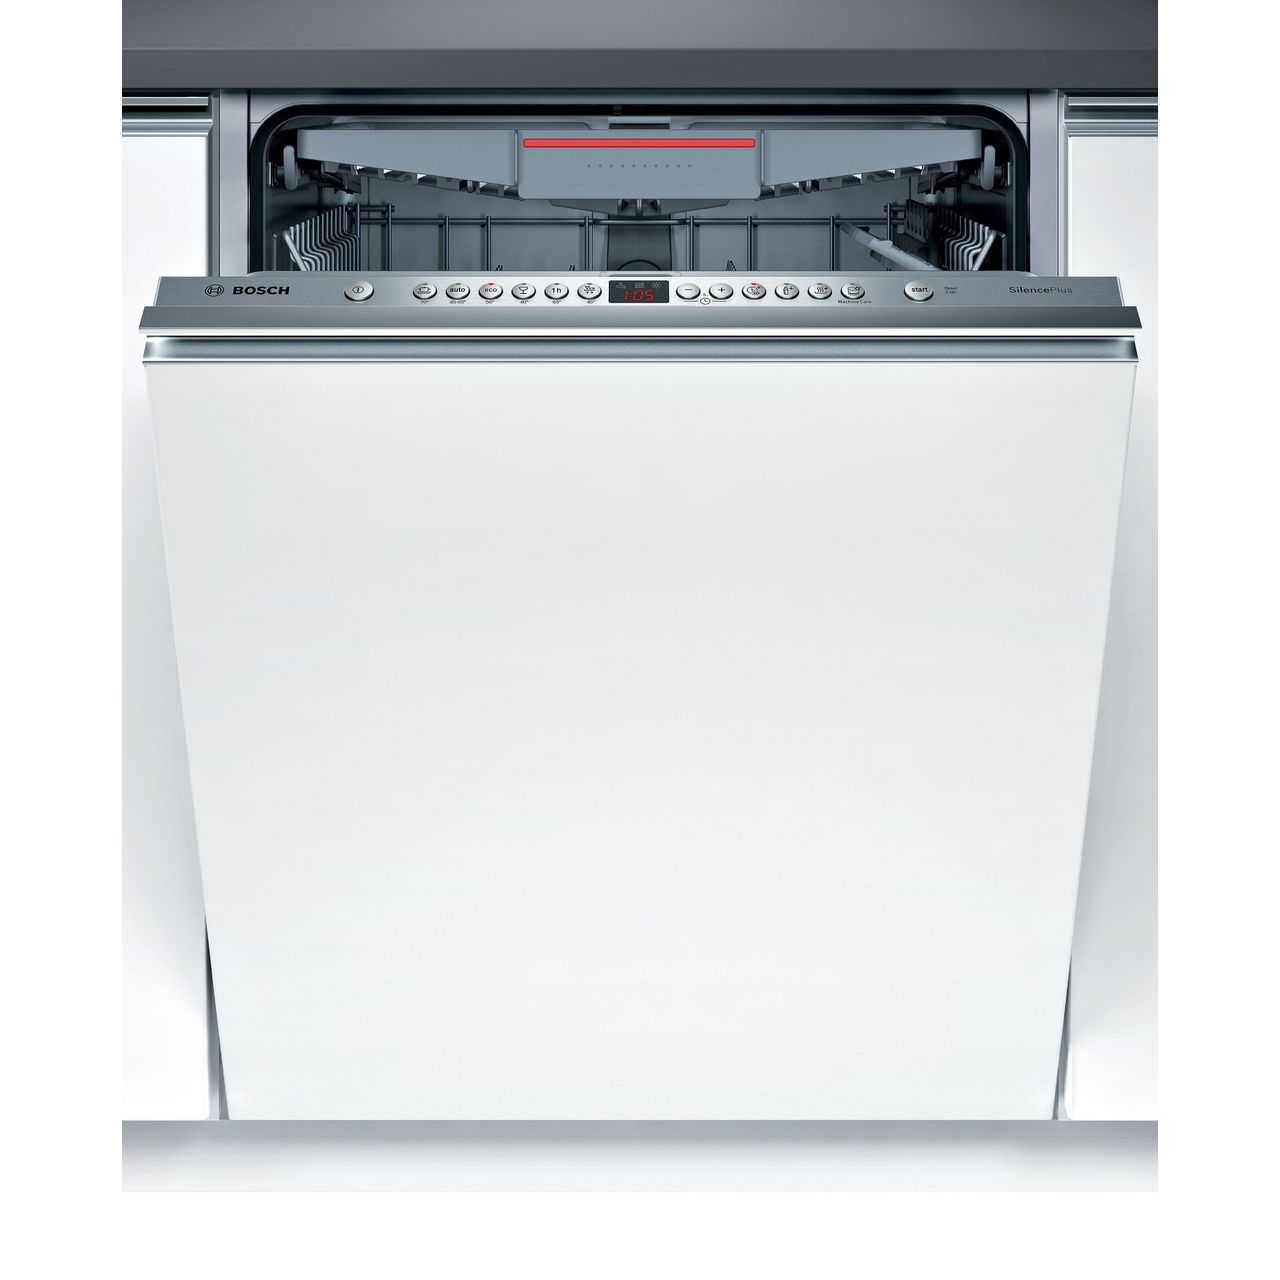 Bosch Serie 4 SMV46NX00G Fully Integrated Standard Dishwasher Review